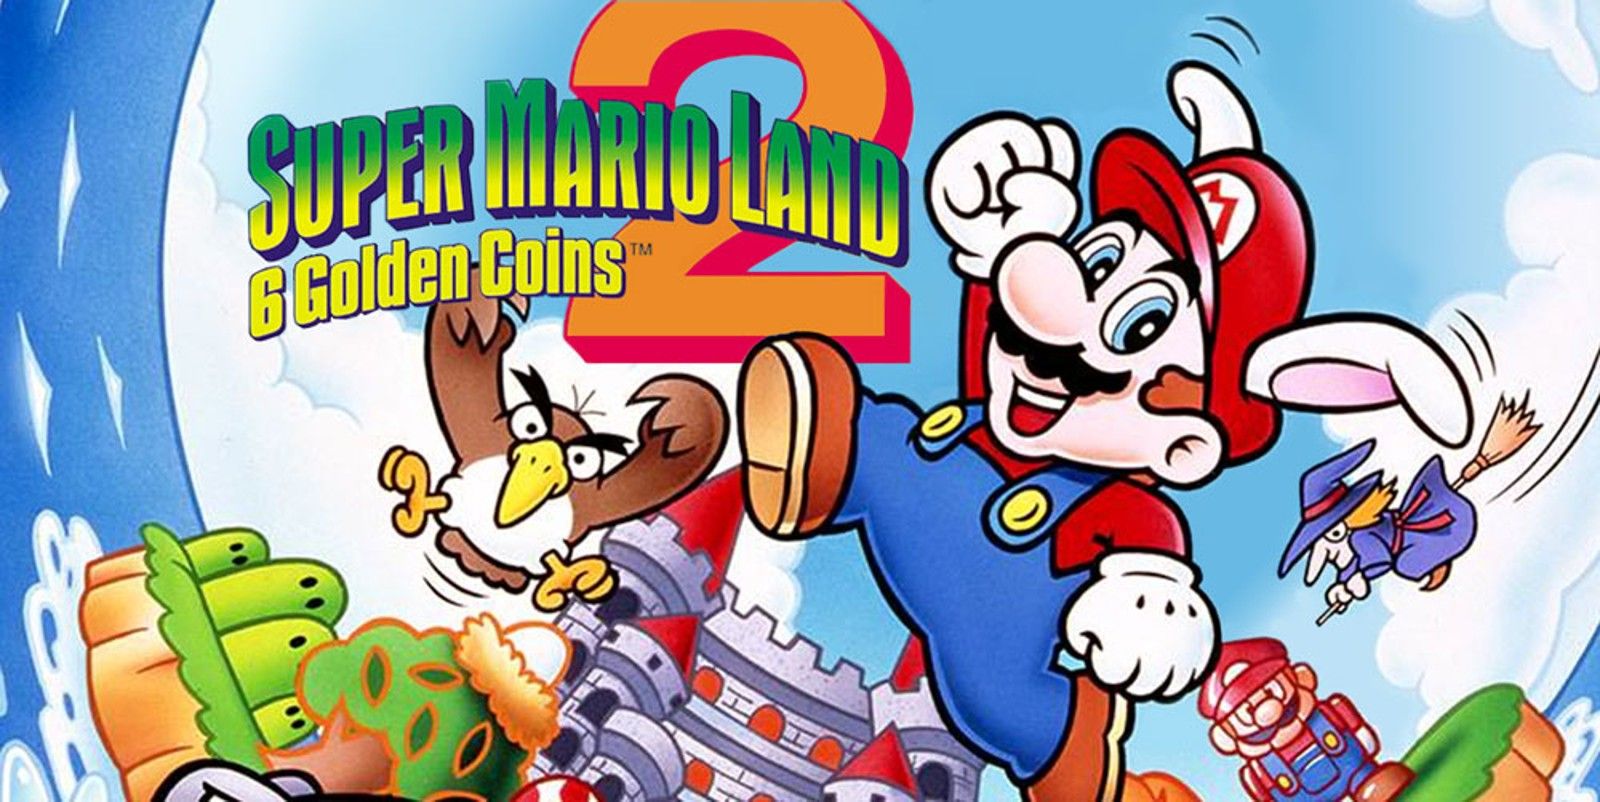 The Best Mario Game On Each Nintendo Console